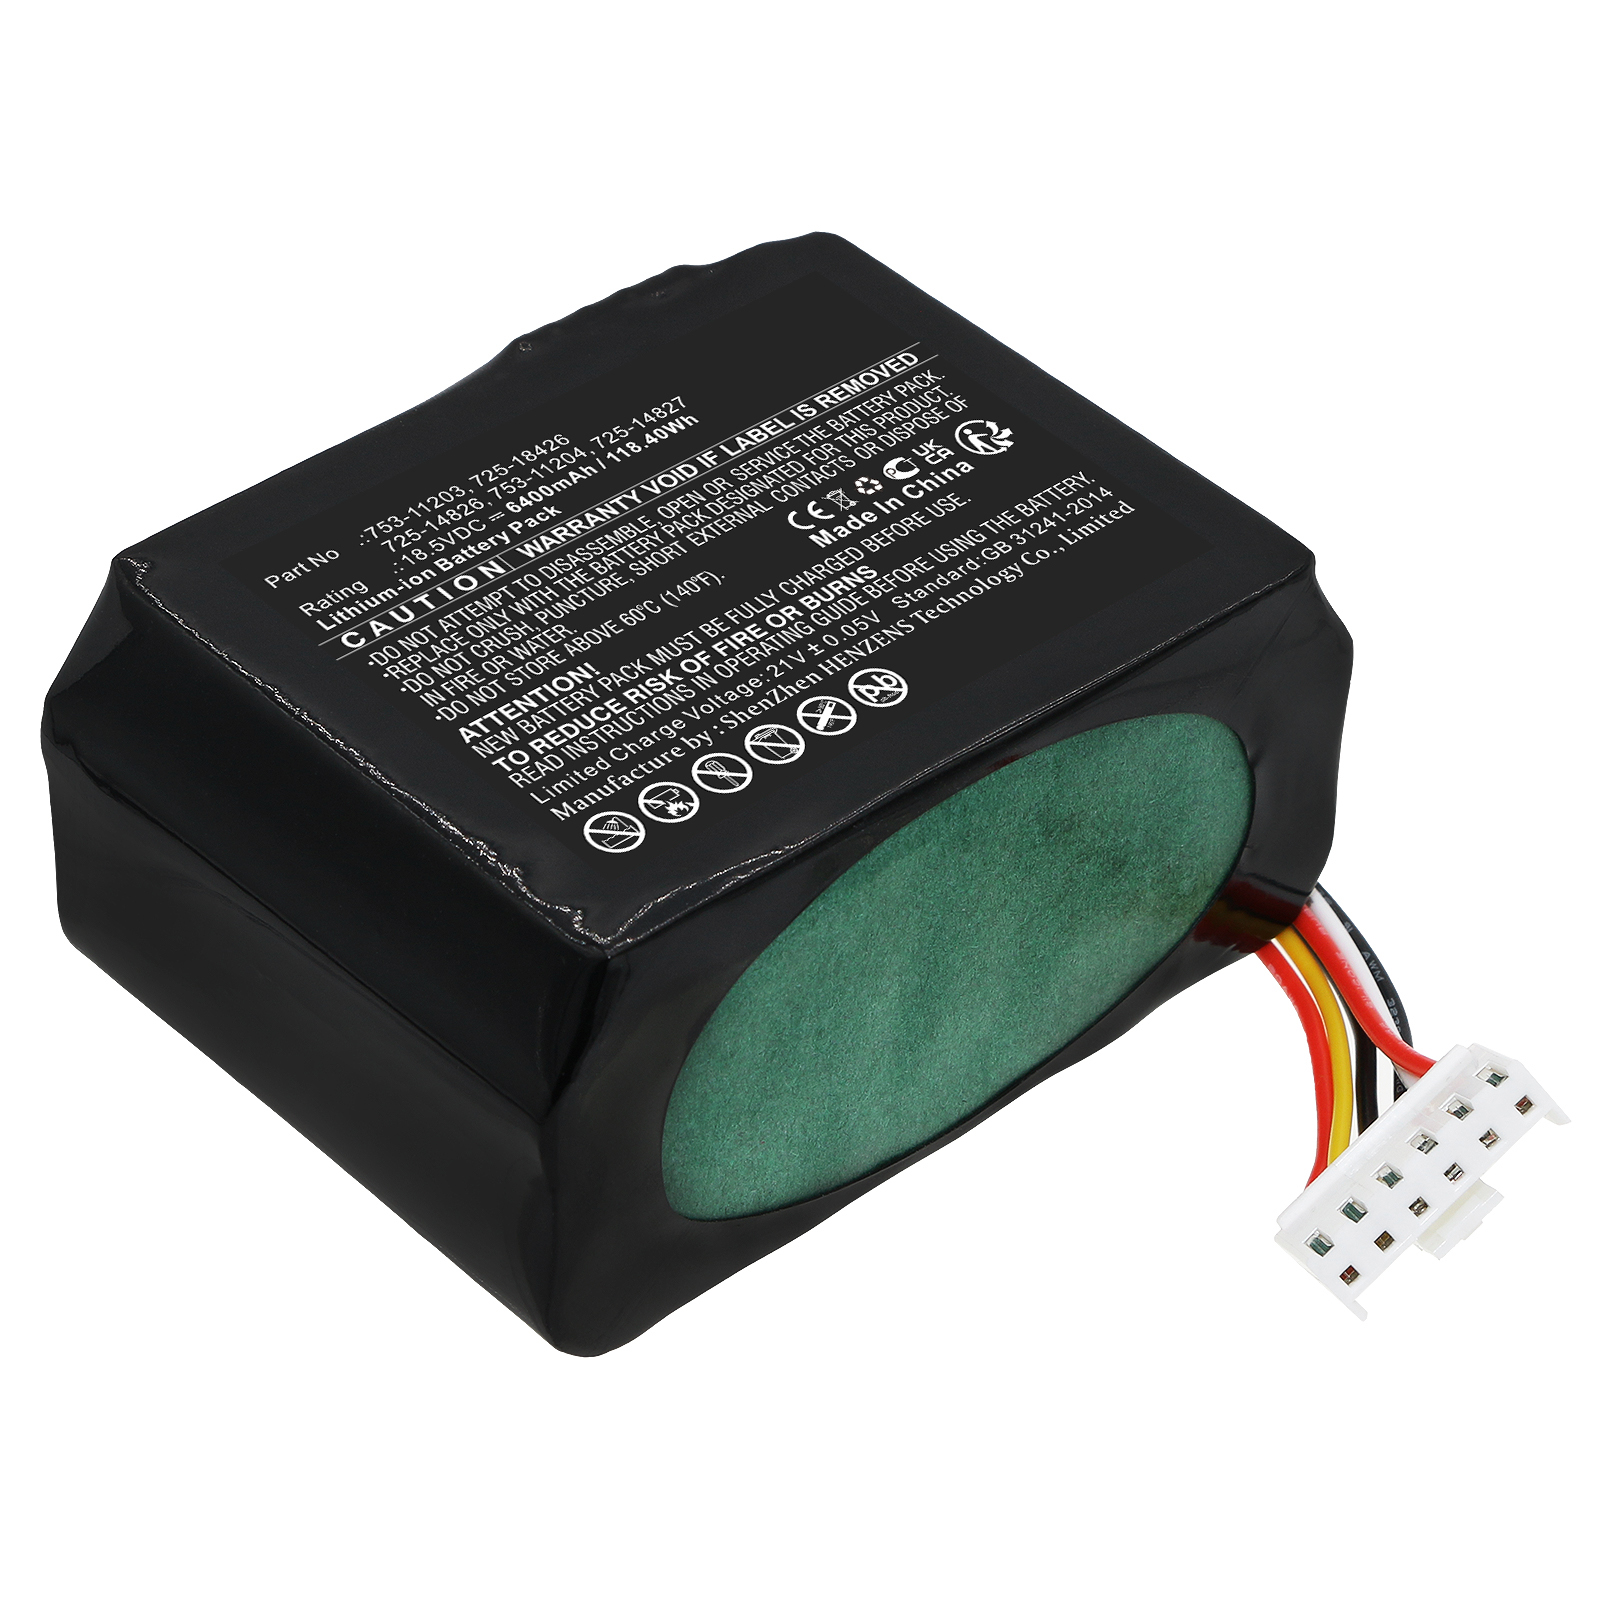 Synergy Digital Lawn Mower Battery, Compatible with Robomow 725-14826 Lawn Mower Battery (Li-ion, 18.5V, 6400mAh)